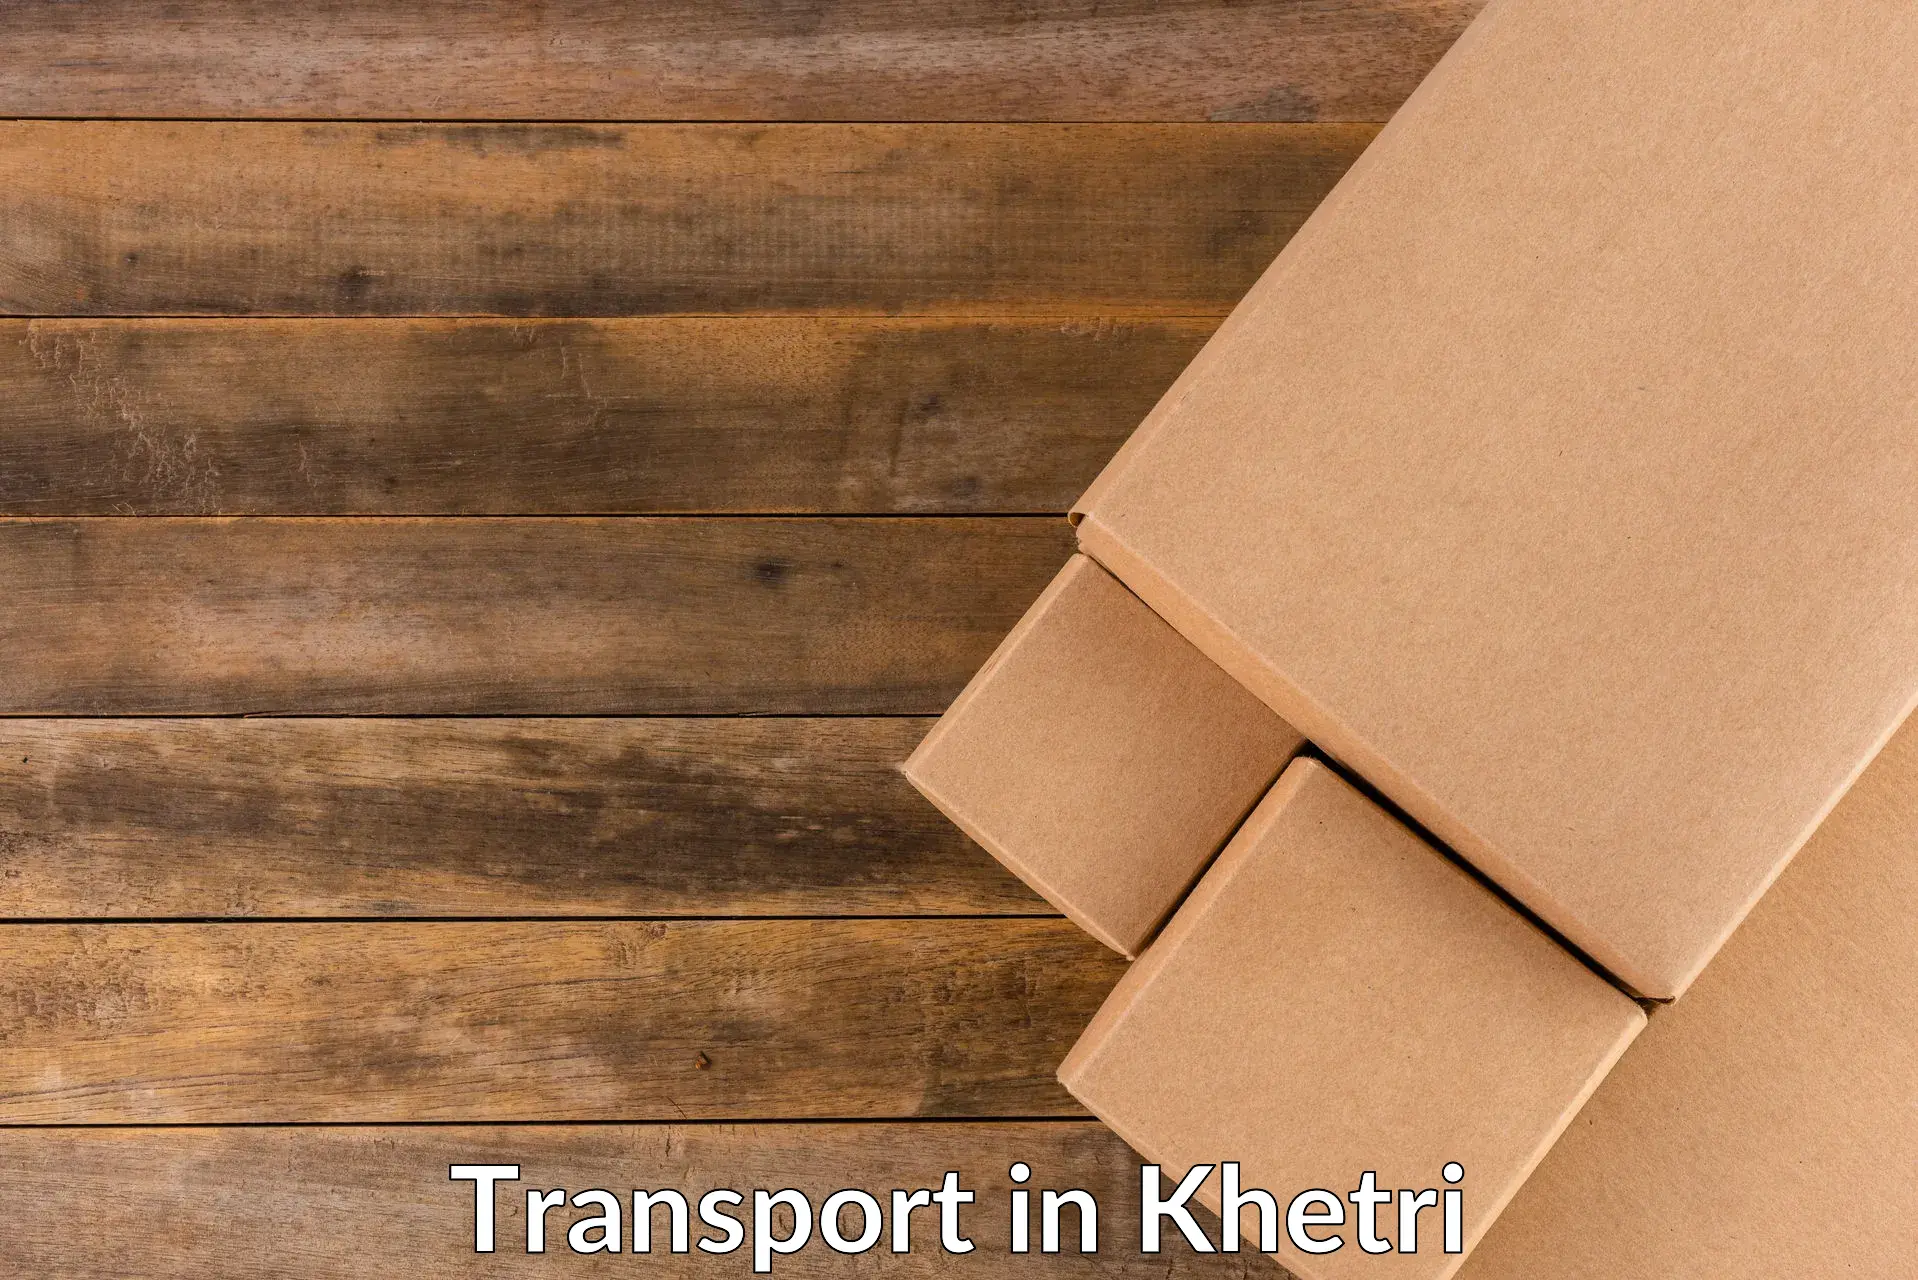 Nationwide transport services in Khetri